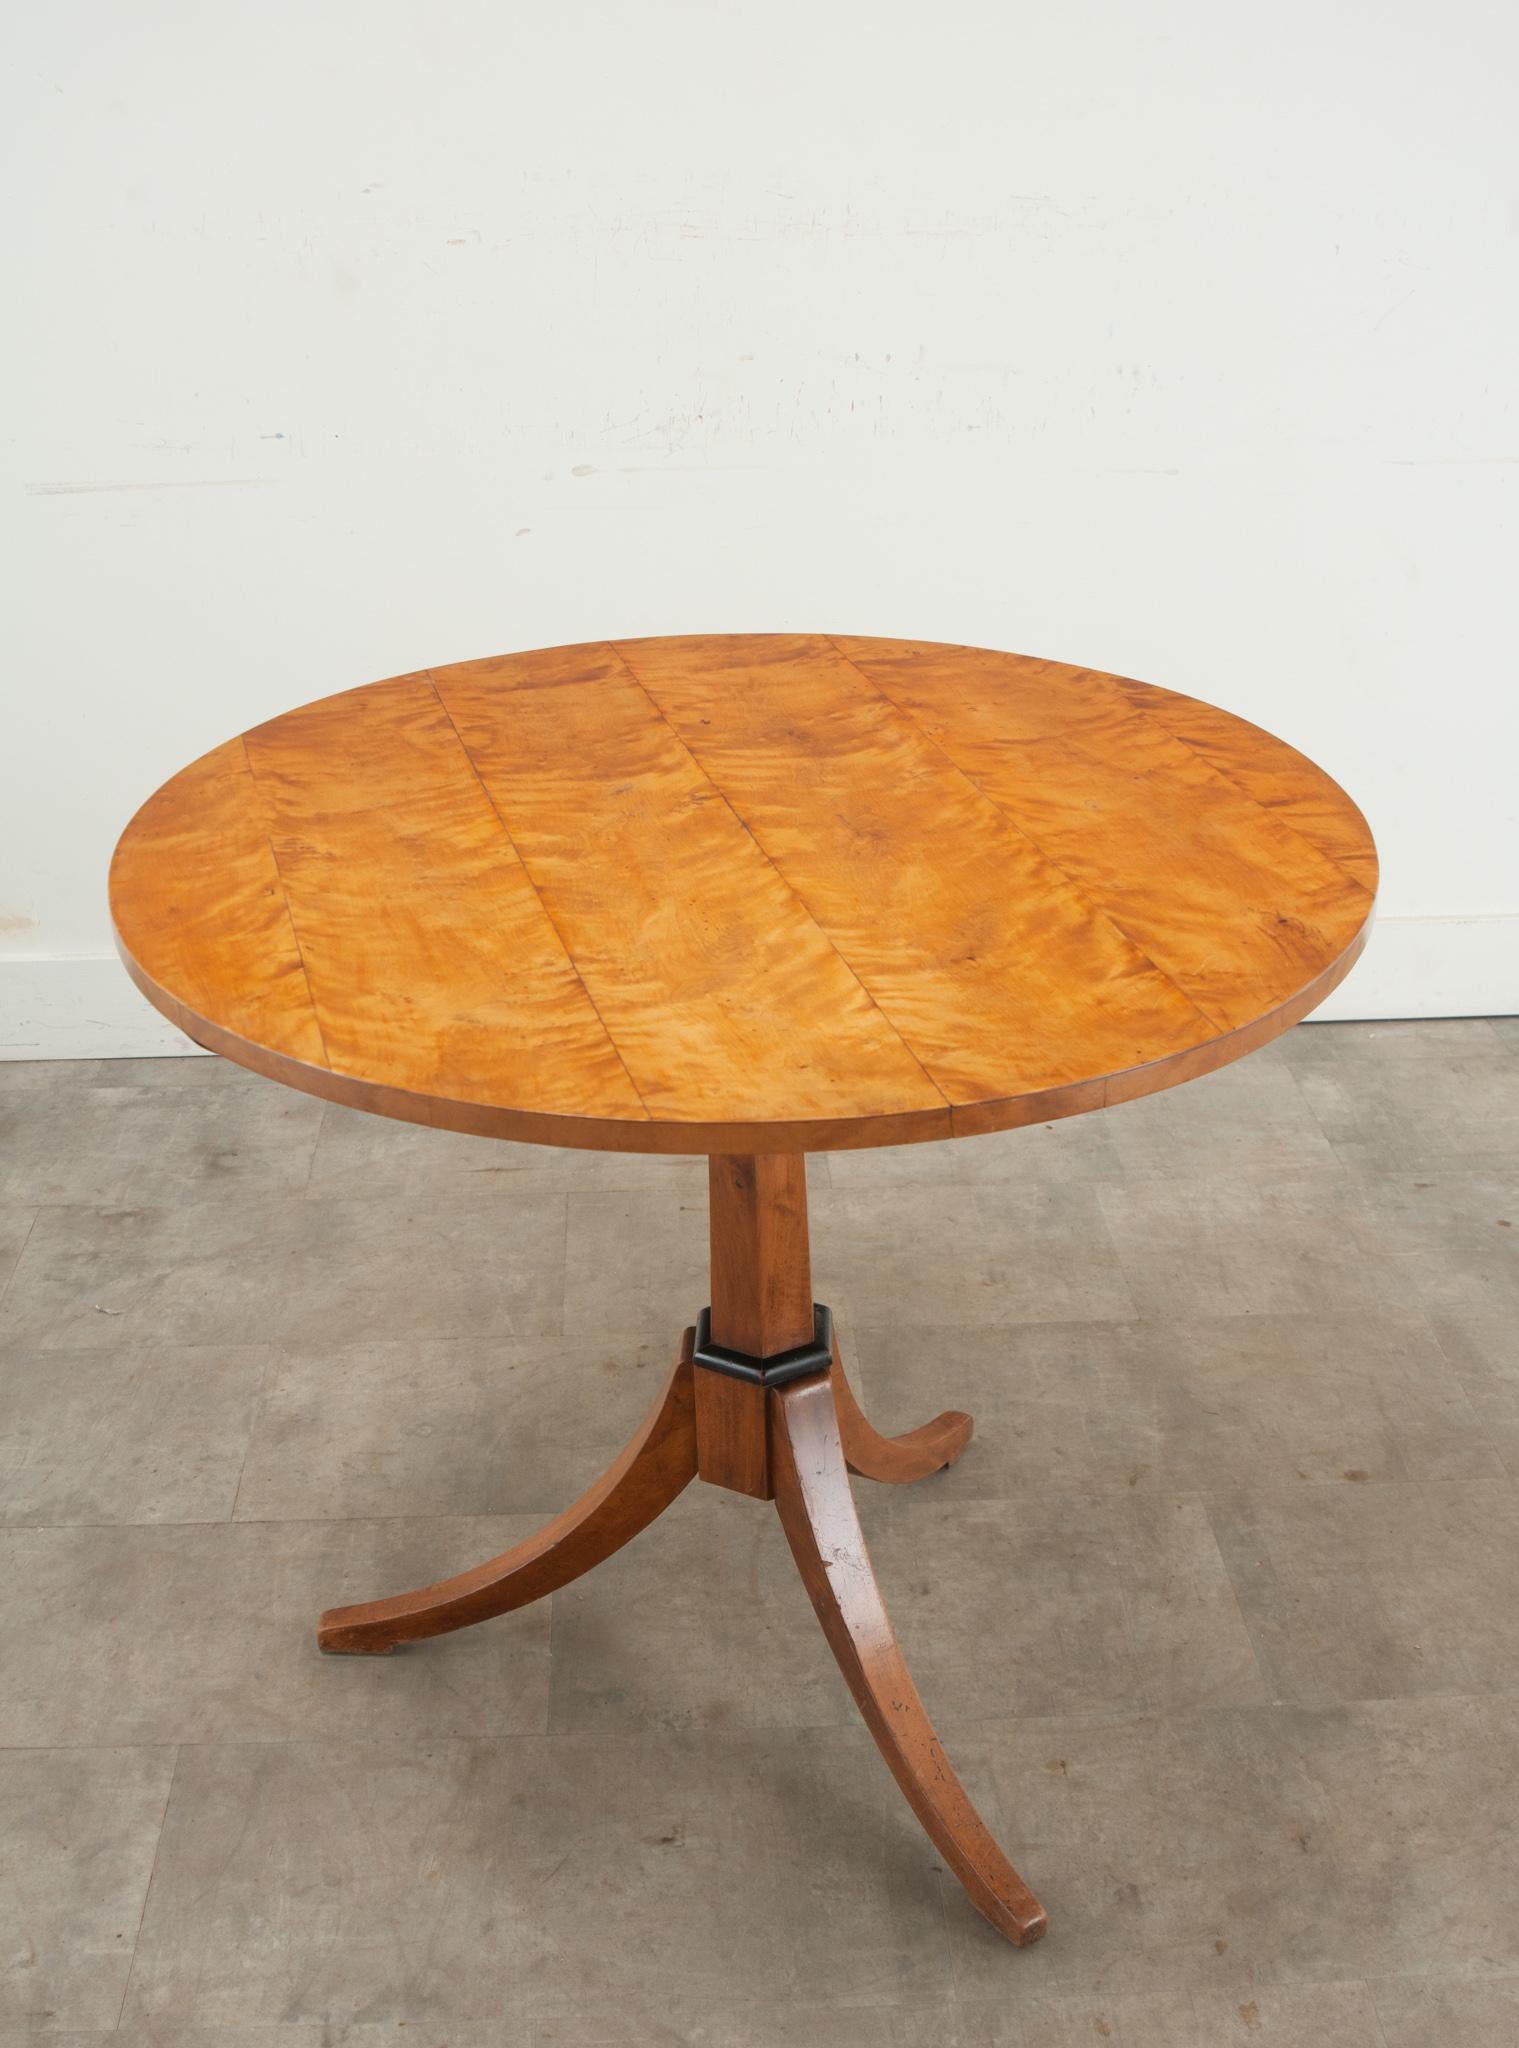 A Swedish tilt-top round table made in the 1800’s. The top is made from wonderfully colored birch with handsome grain patterns and rests over a geometric pedestal base with three splayed legs. There’s a touch of ebonized trim giving this table depth